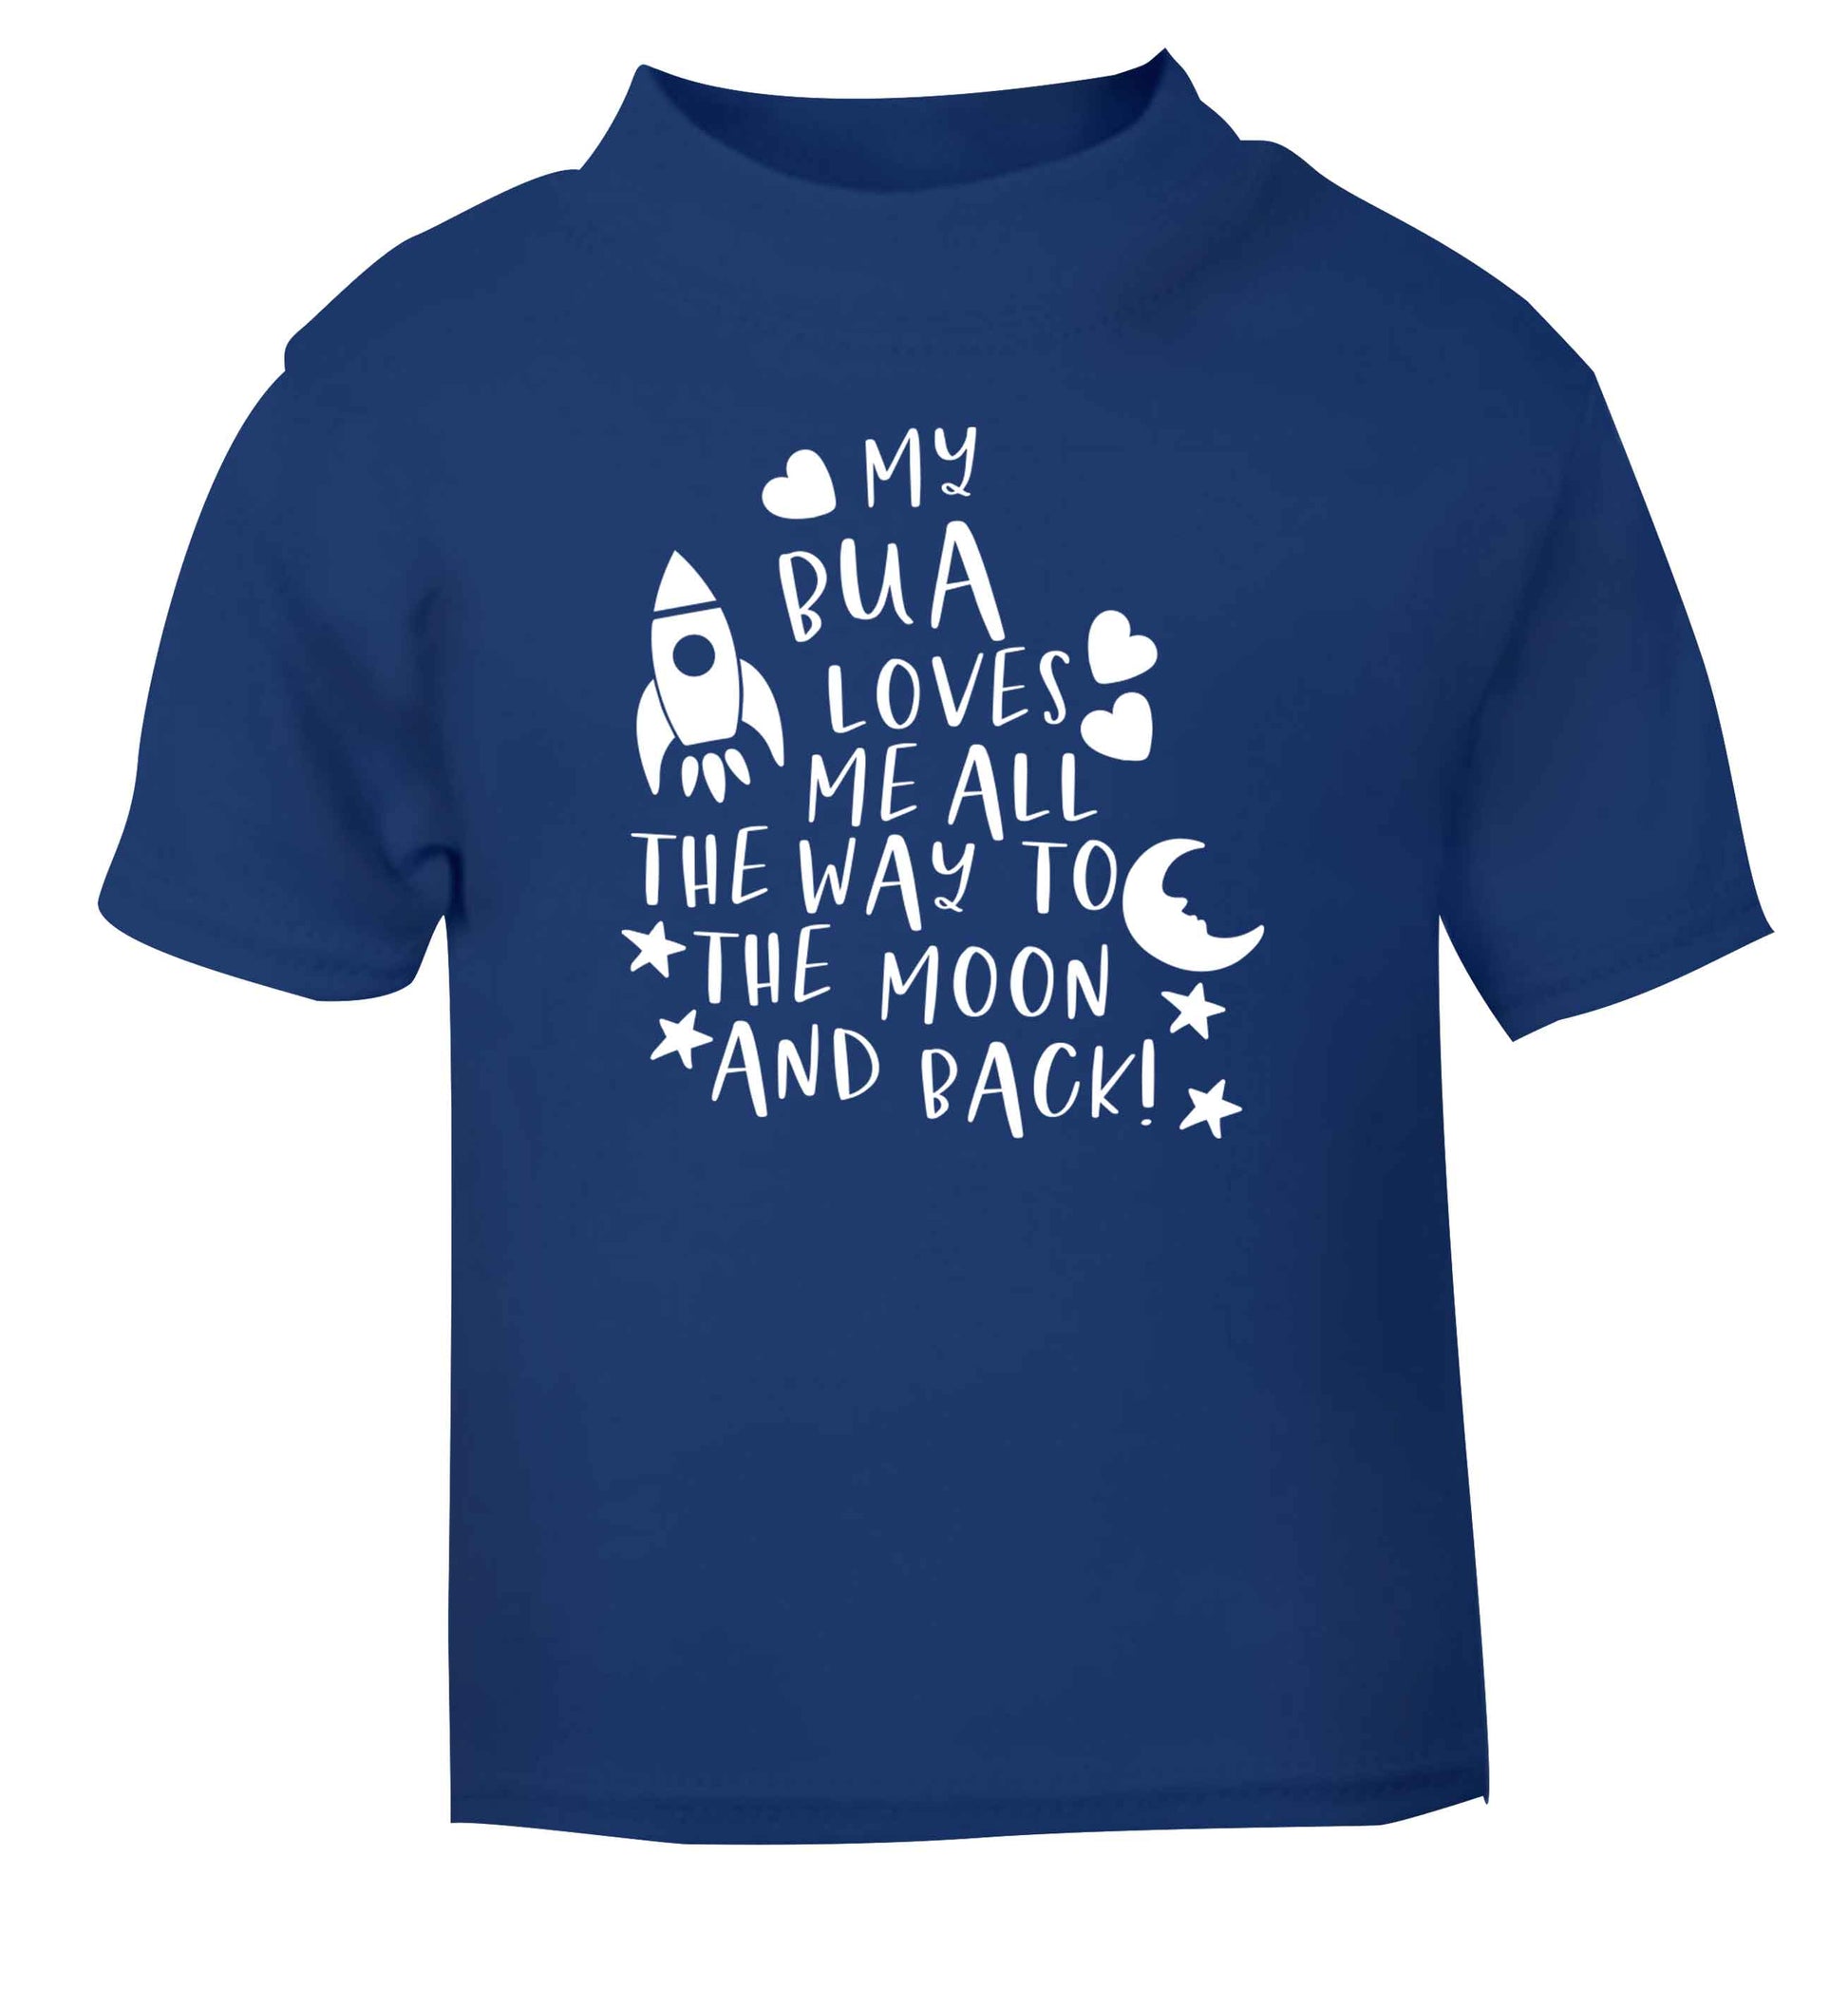 My bua loves me all they way to the moon and back blue Baby Toddler Tshirt 2 Years